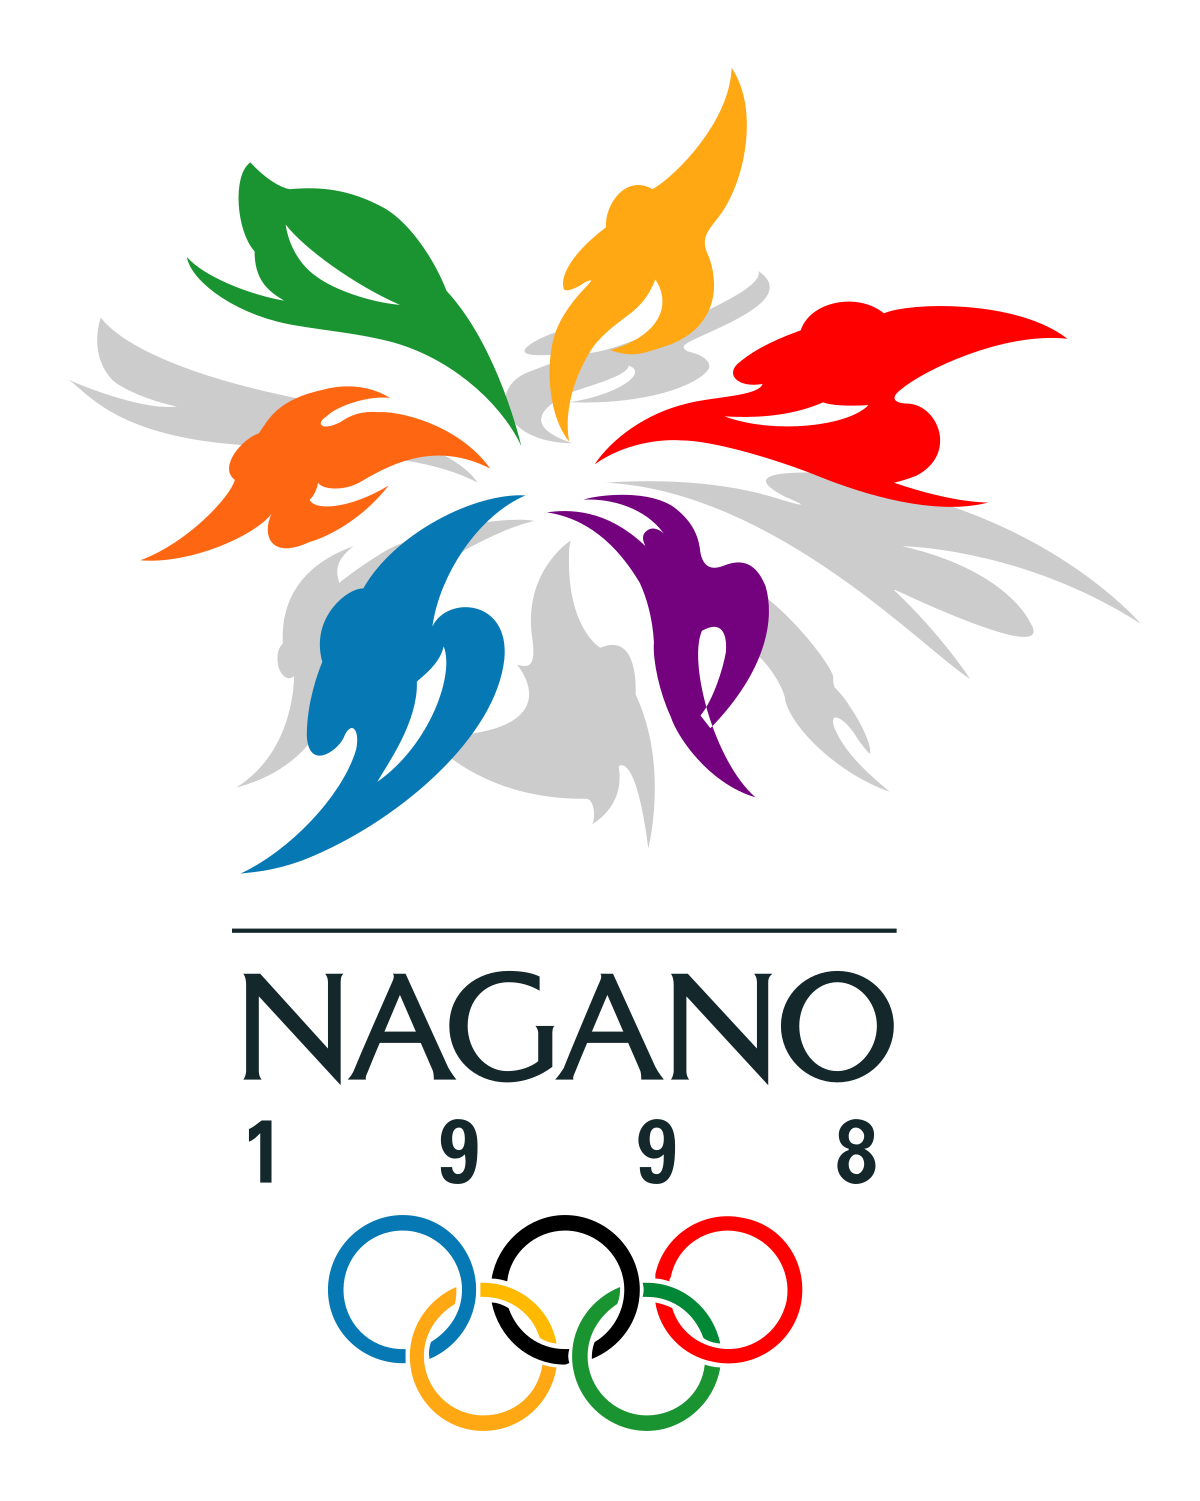  winter olympics wikipedia. Olympic clipart athletics games